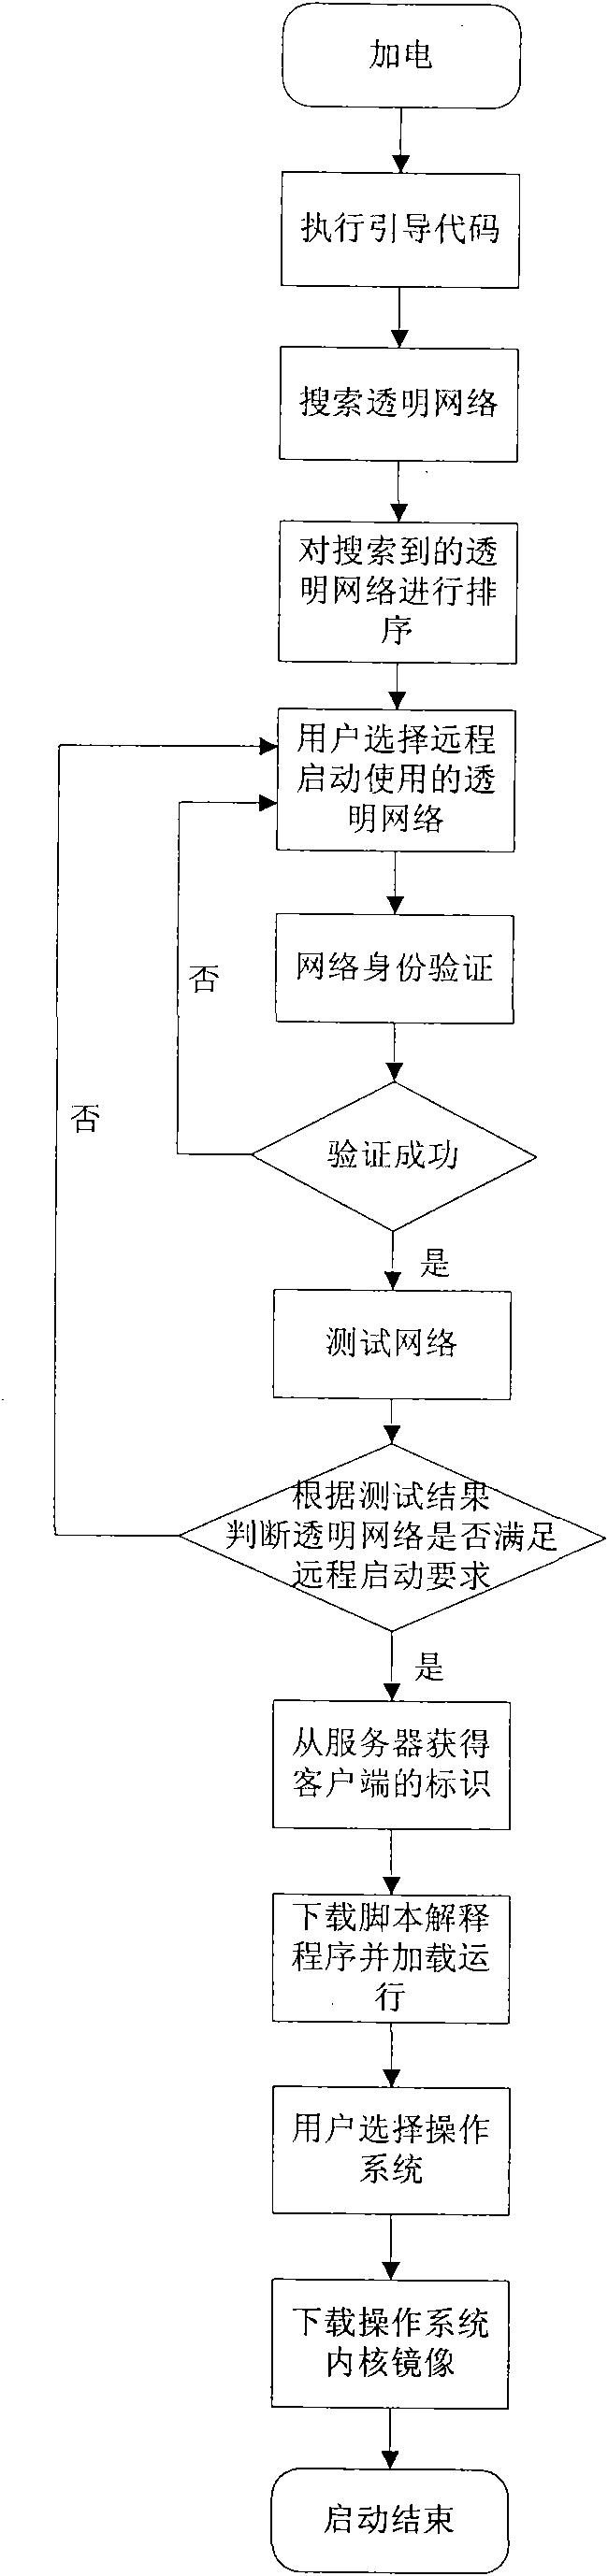 Method for remotely starting transparent computing system client through wireless local area network